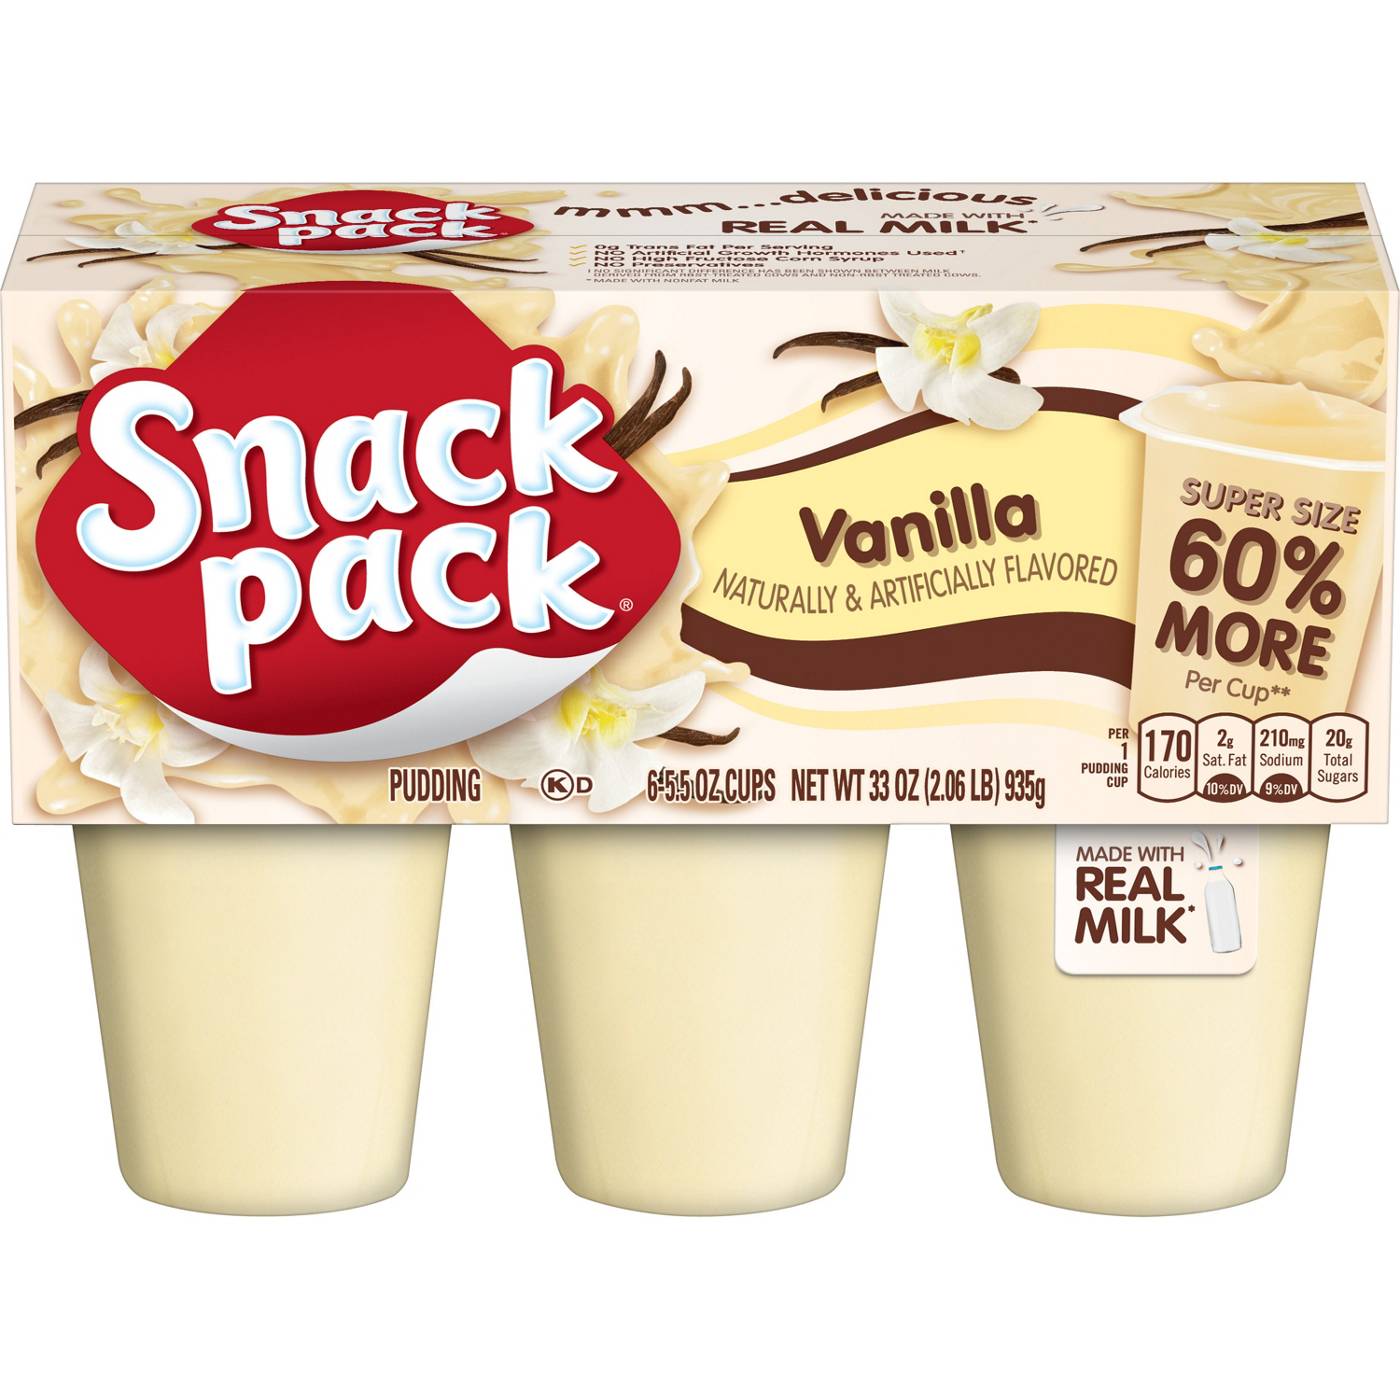 Snack Pack Super Size Vanilla Pudding Cups; image 1 of 7